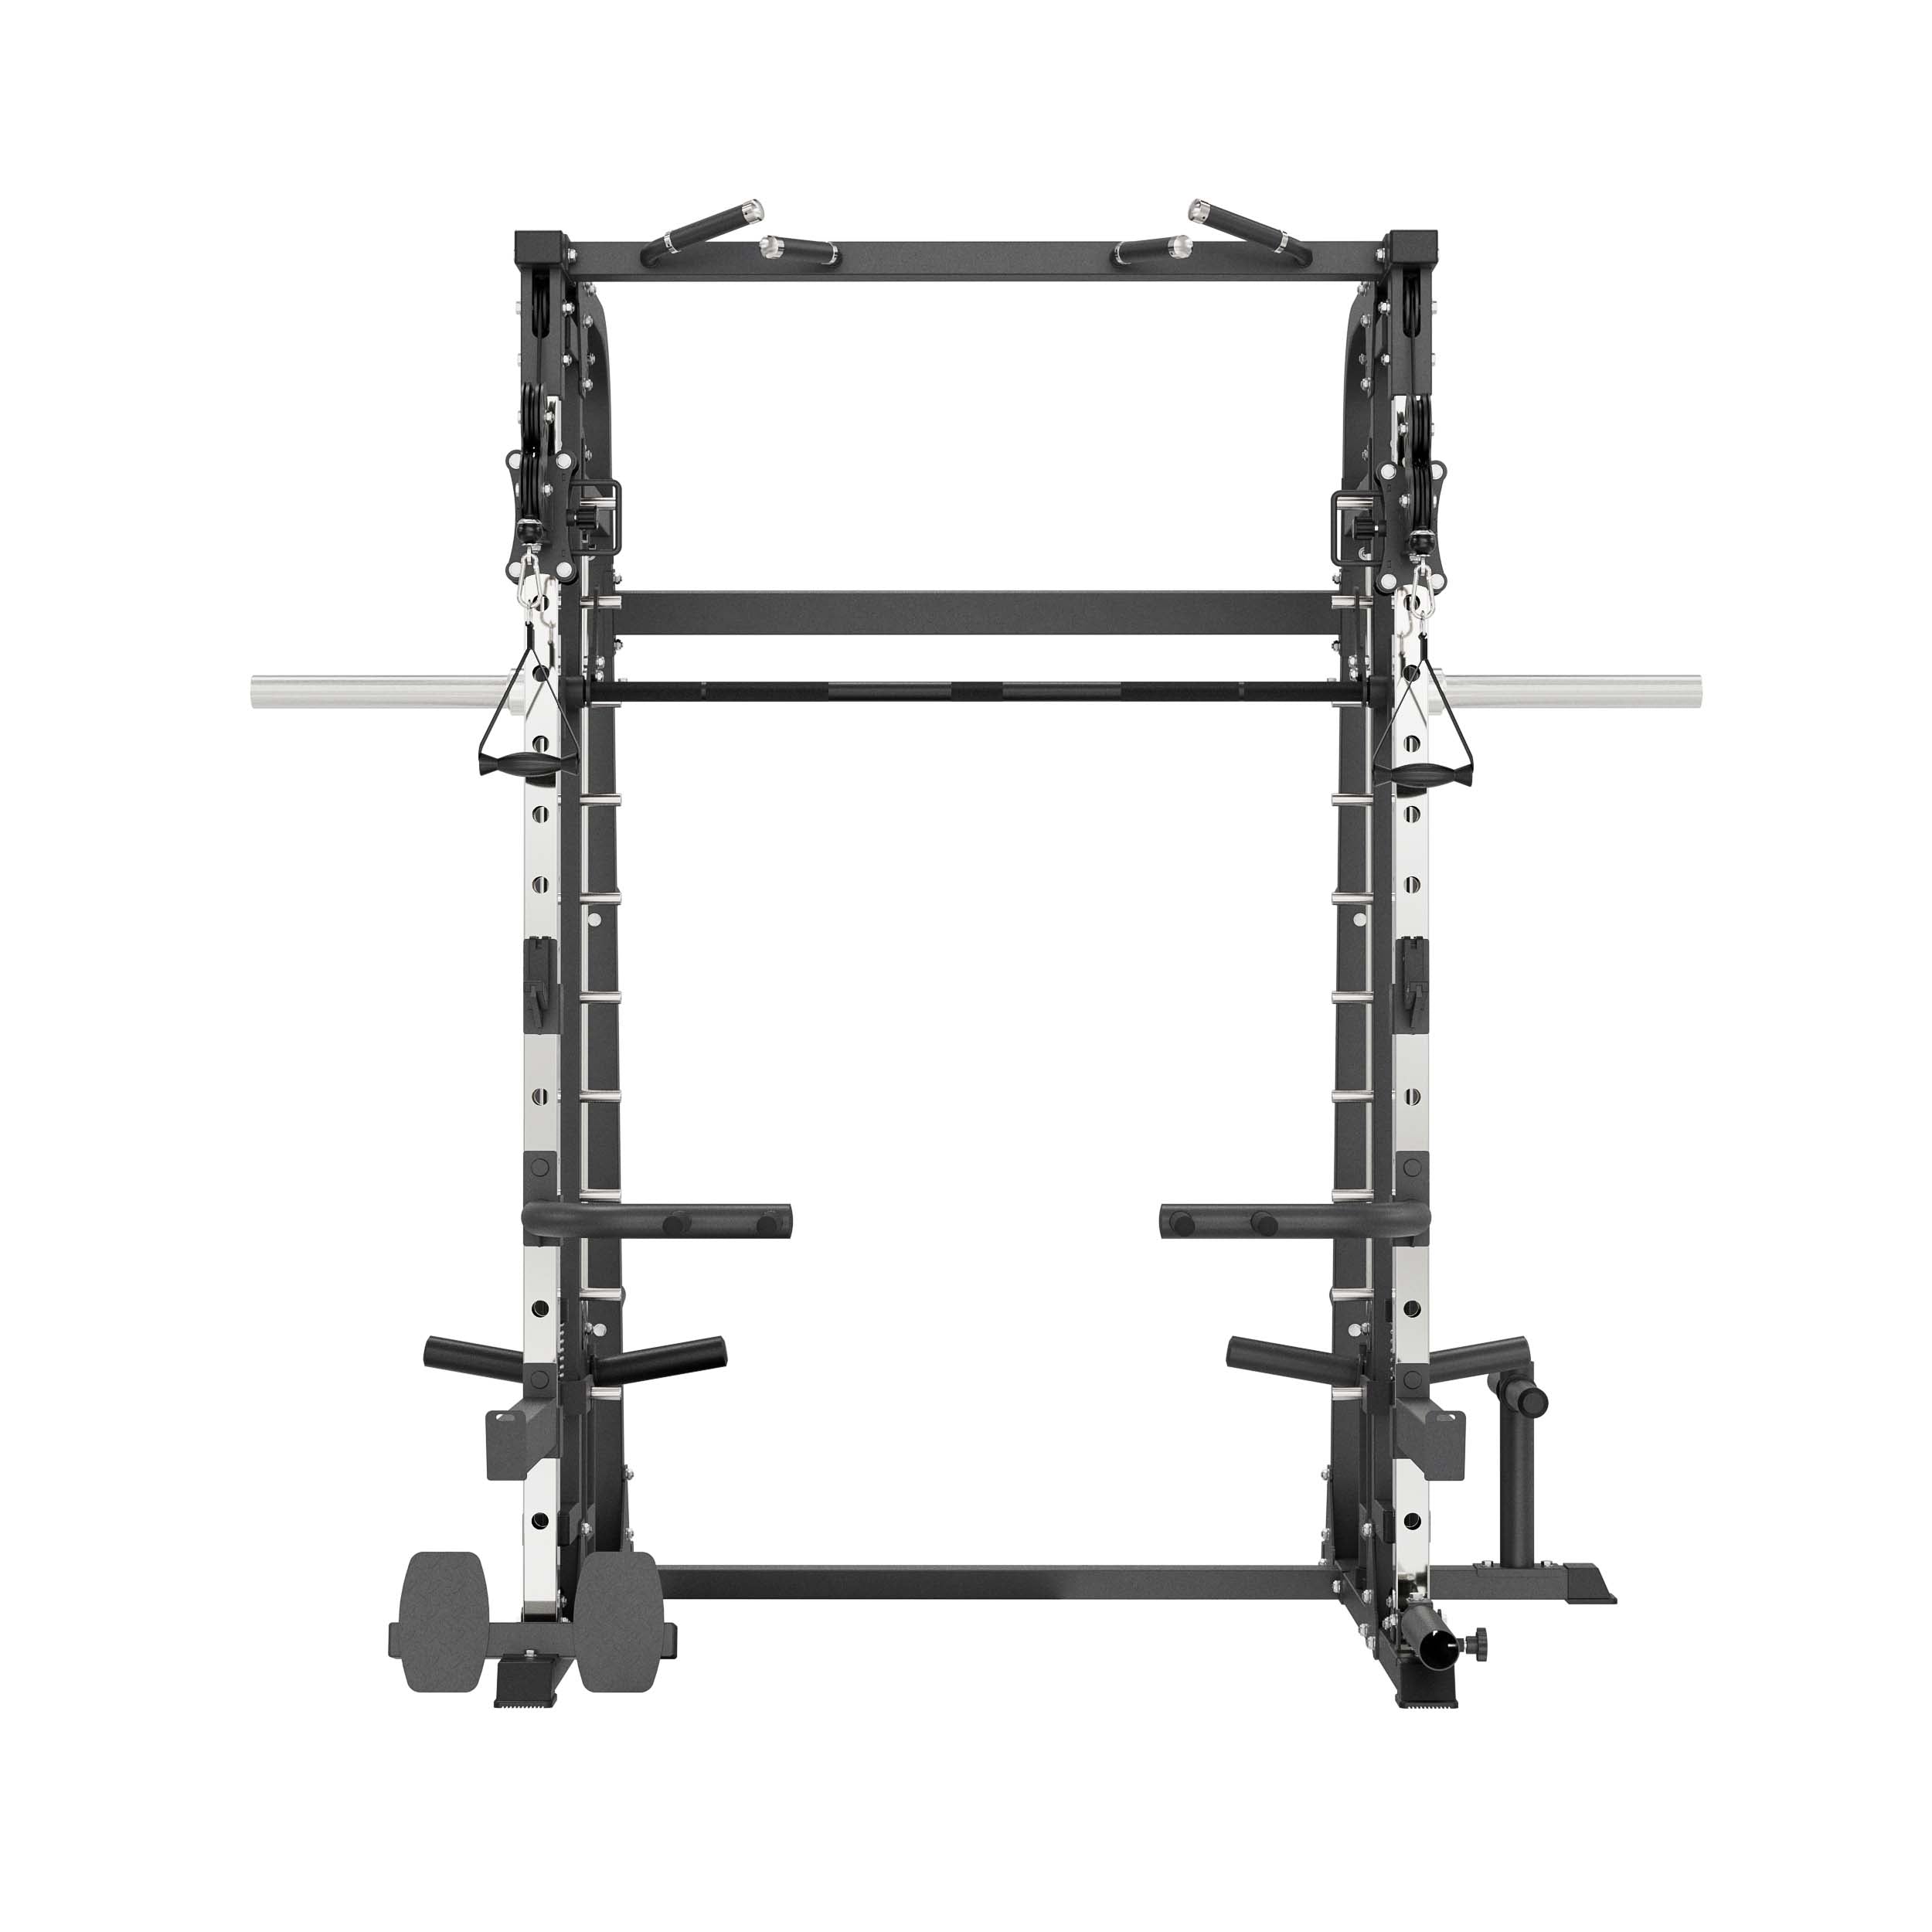 MAJOR FITNESS All-In-One Home Gym Smith Machine Spirit B2